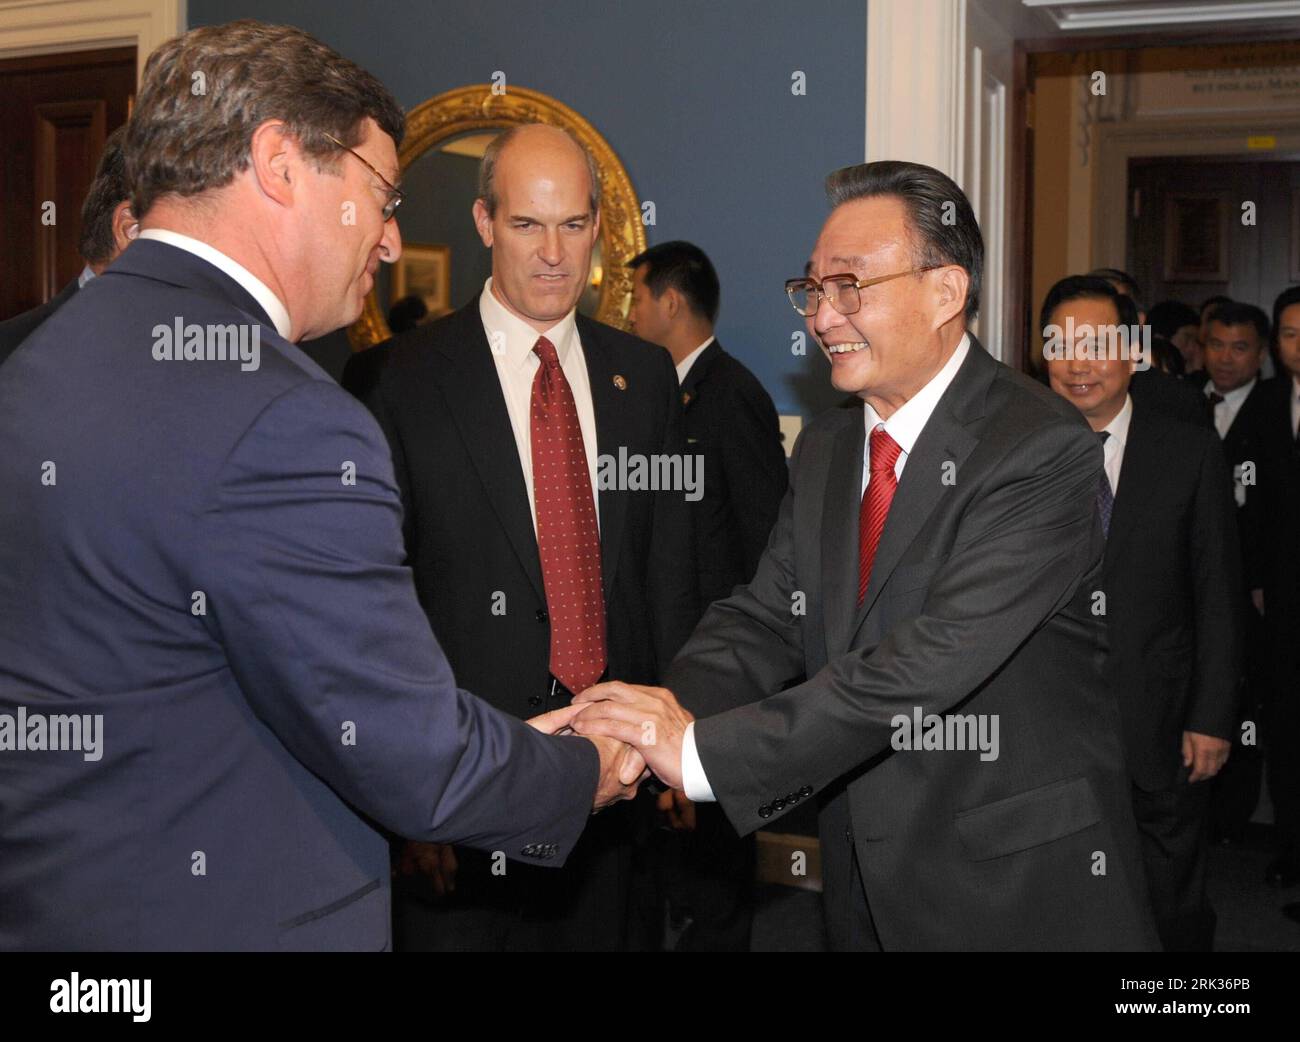 Bildnummer: 53334197  Datum: 09.09.2009  Copyright: imago/Xinhua (090909) -- WASHINGTON, Sept. 9, 2009 (Xinhua) -- Wu Bangguo (R FRONT), chairman of the Standing Committee of China s National s Congress, meets with chairmen of the US-China Inter-parliamentary Exchange Group, the U.S.-China Working Group as well as other groups under the U.S. House of Representatives, in Washington, the United States, Sept. 9, 2009. (Xinhua/Ma Zhancheng) (hdt) (1)US-WASHINGTON-WU BANGGUO-HOUSE OF REPRESENTATIVES-MEETING PUBLICATIONxNOTxINxCHN People Politik premiumd kbdig xng 2009 quer     Bildnummer 53334197 D Stock Photo